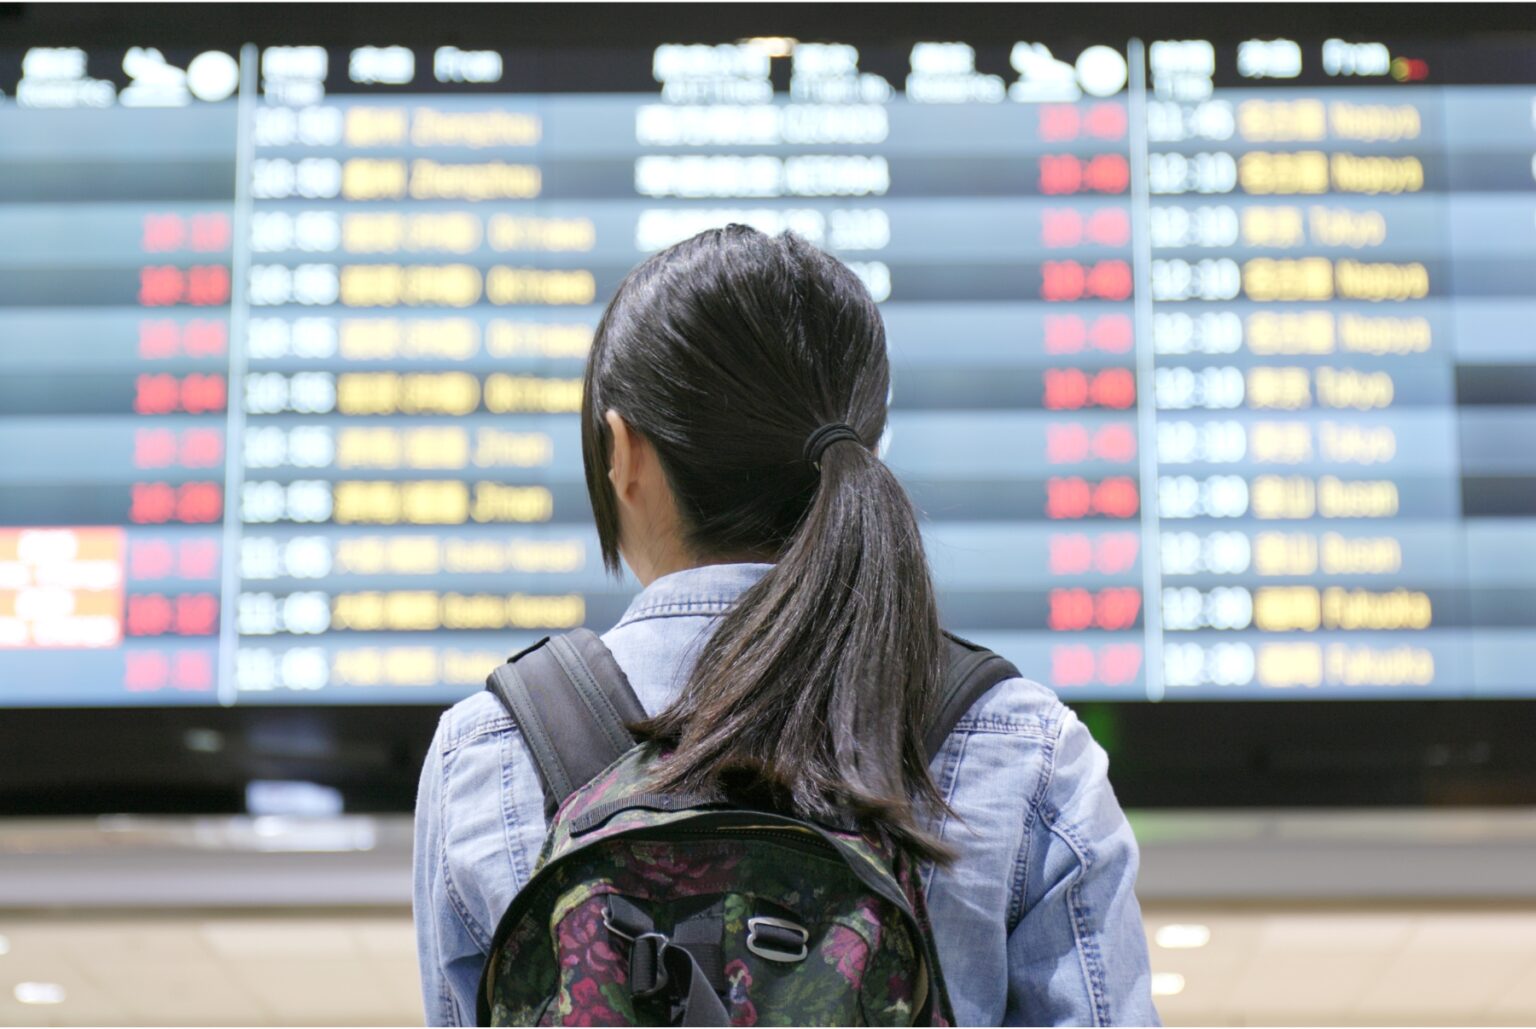 A woman looks at a departure board at the Hong Kong International Airport. Her back faces the camera as she looks at the board. She has her long hair tied back in a low ponytail that falls down her back. She wears a blue collared shirt and a backpack.